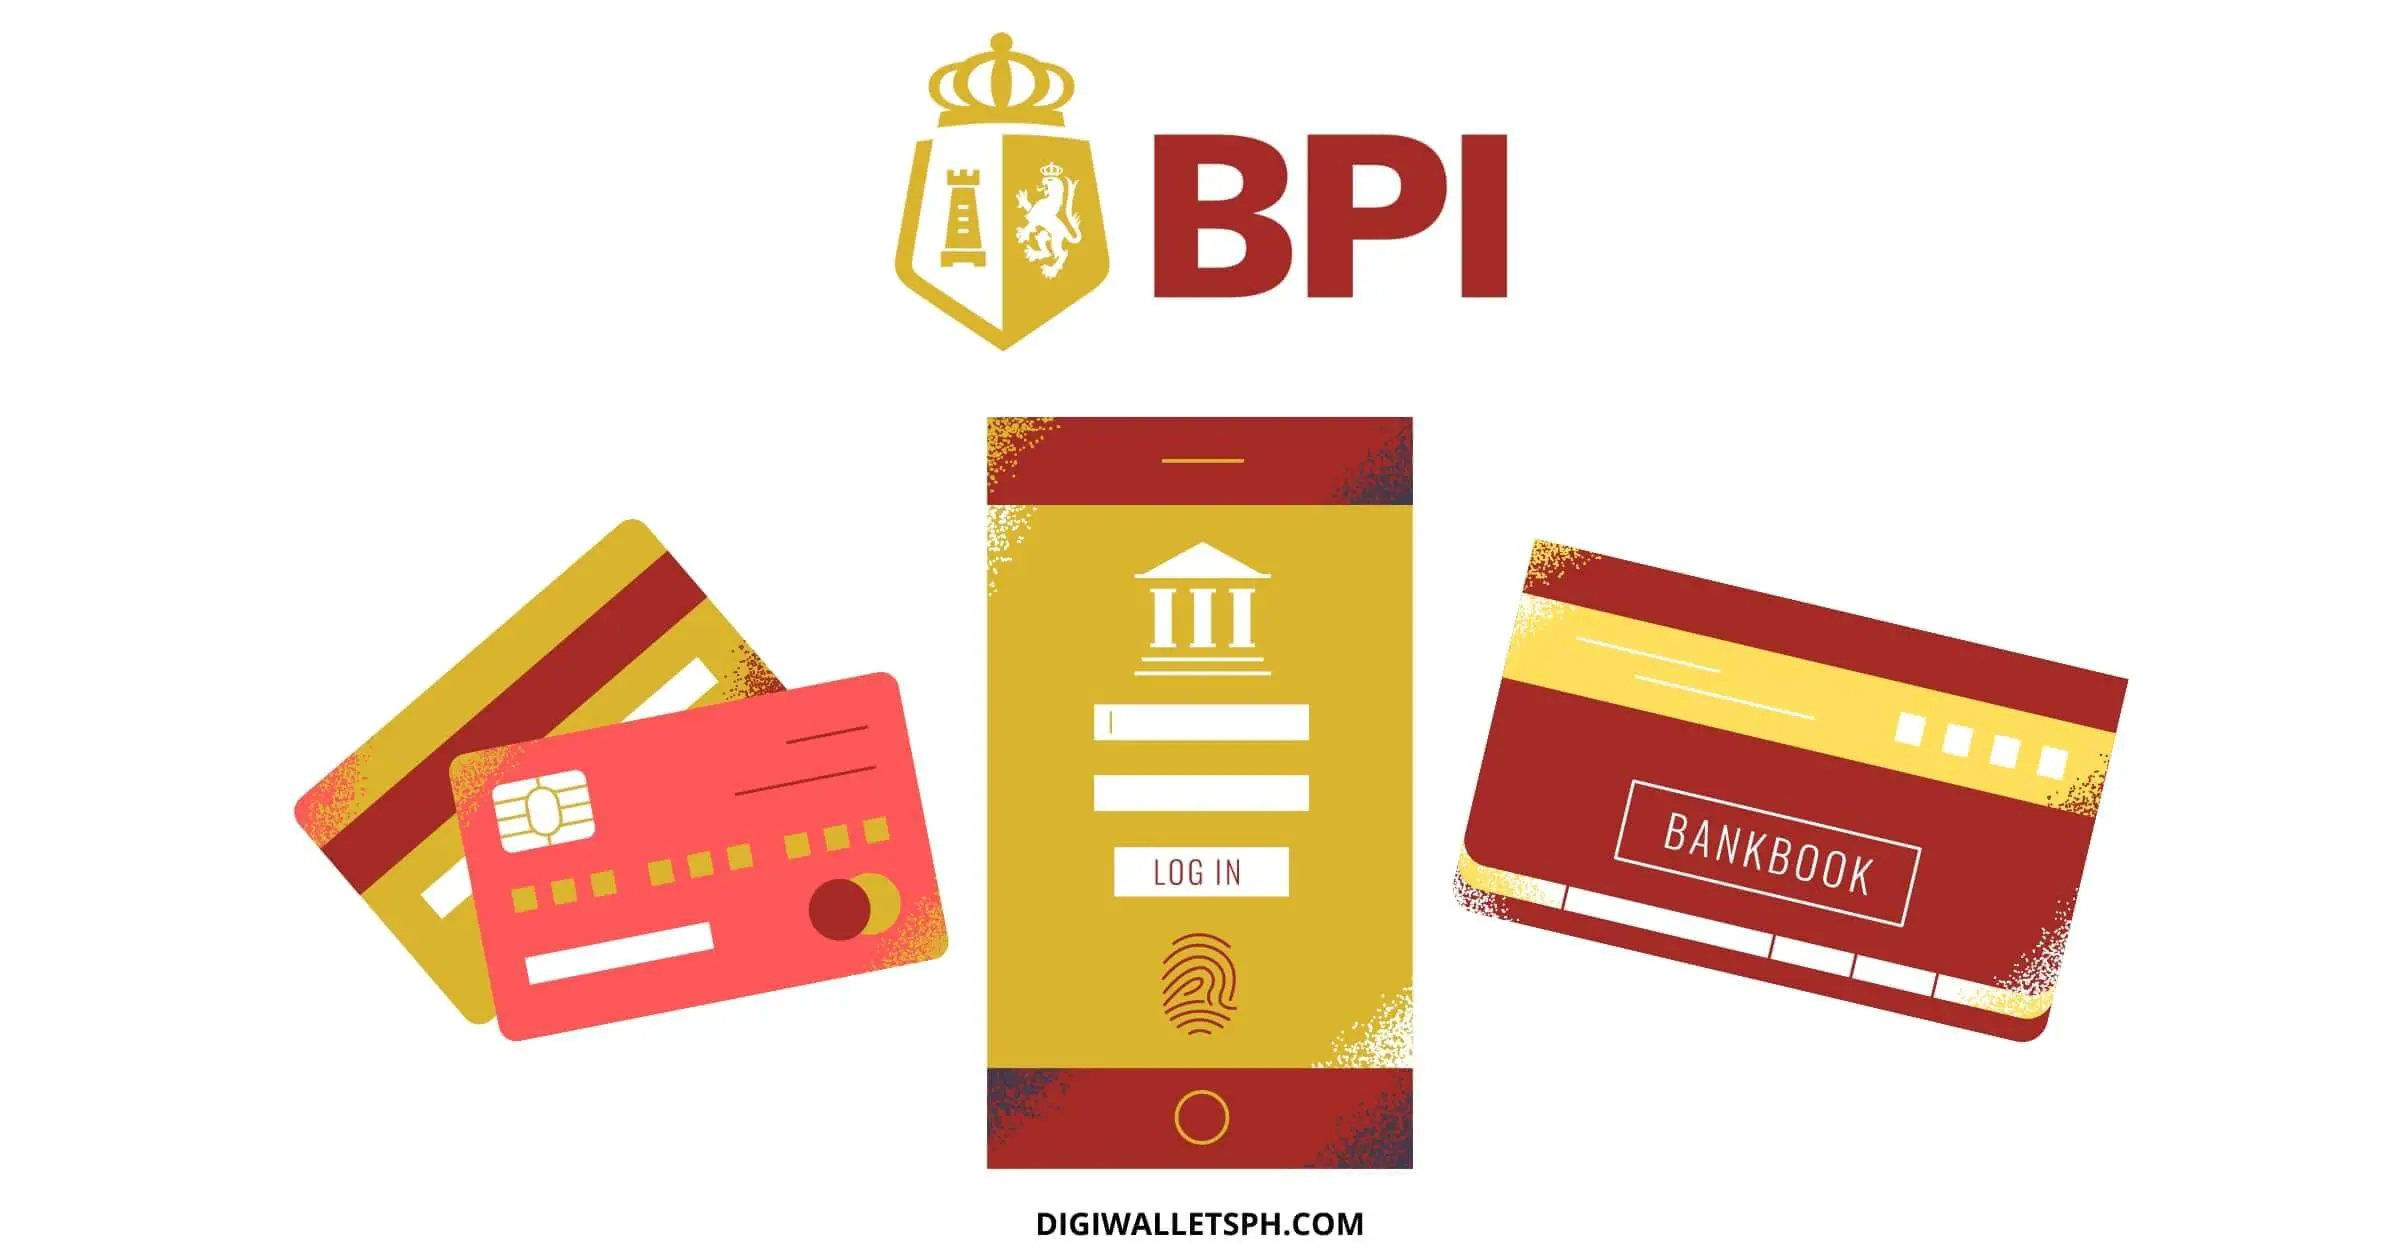 How much is the maintaining balance in BPI